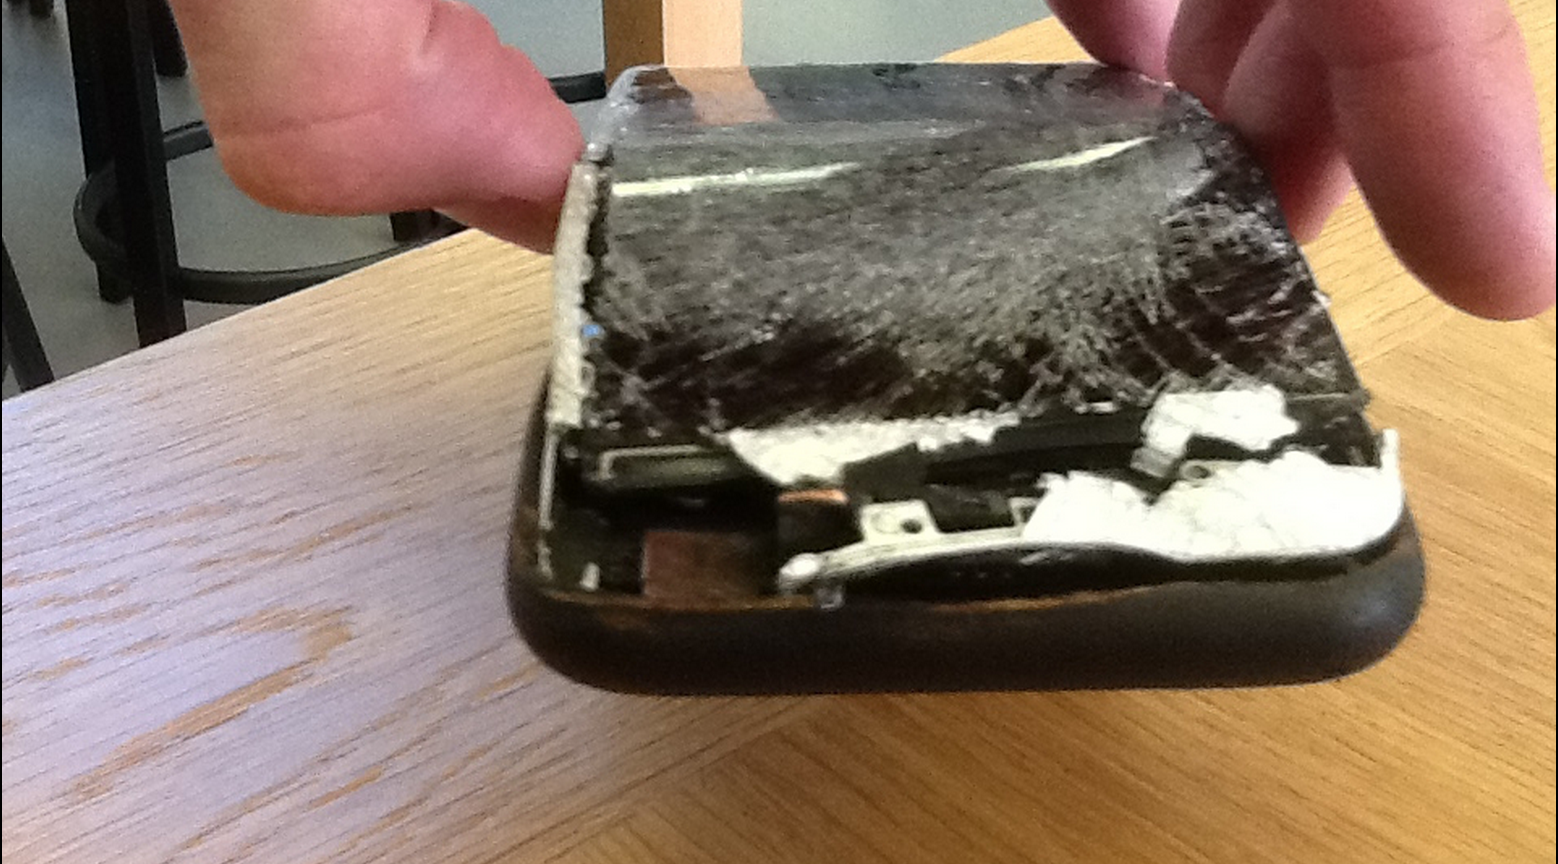 iPhone 6 Catches Fire